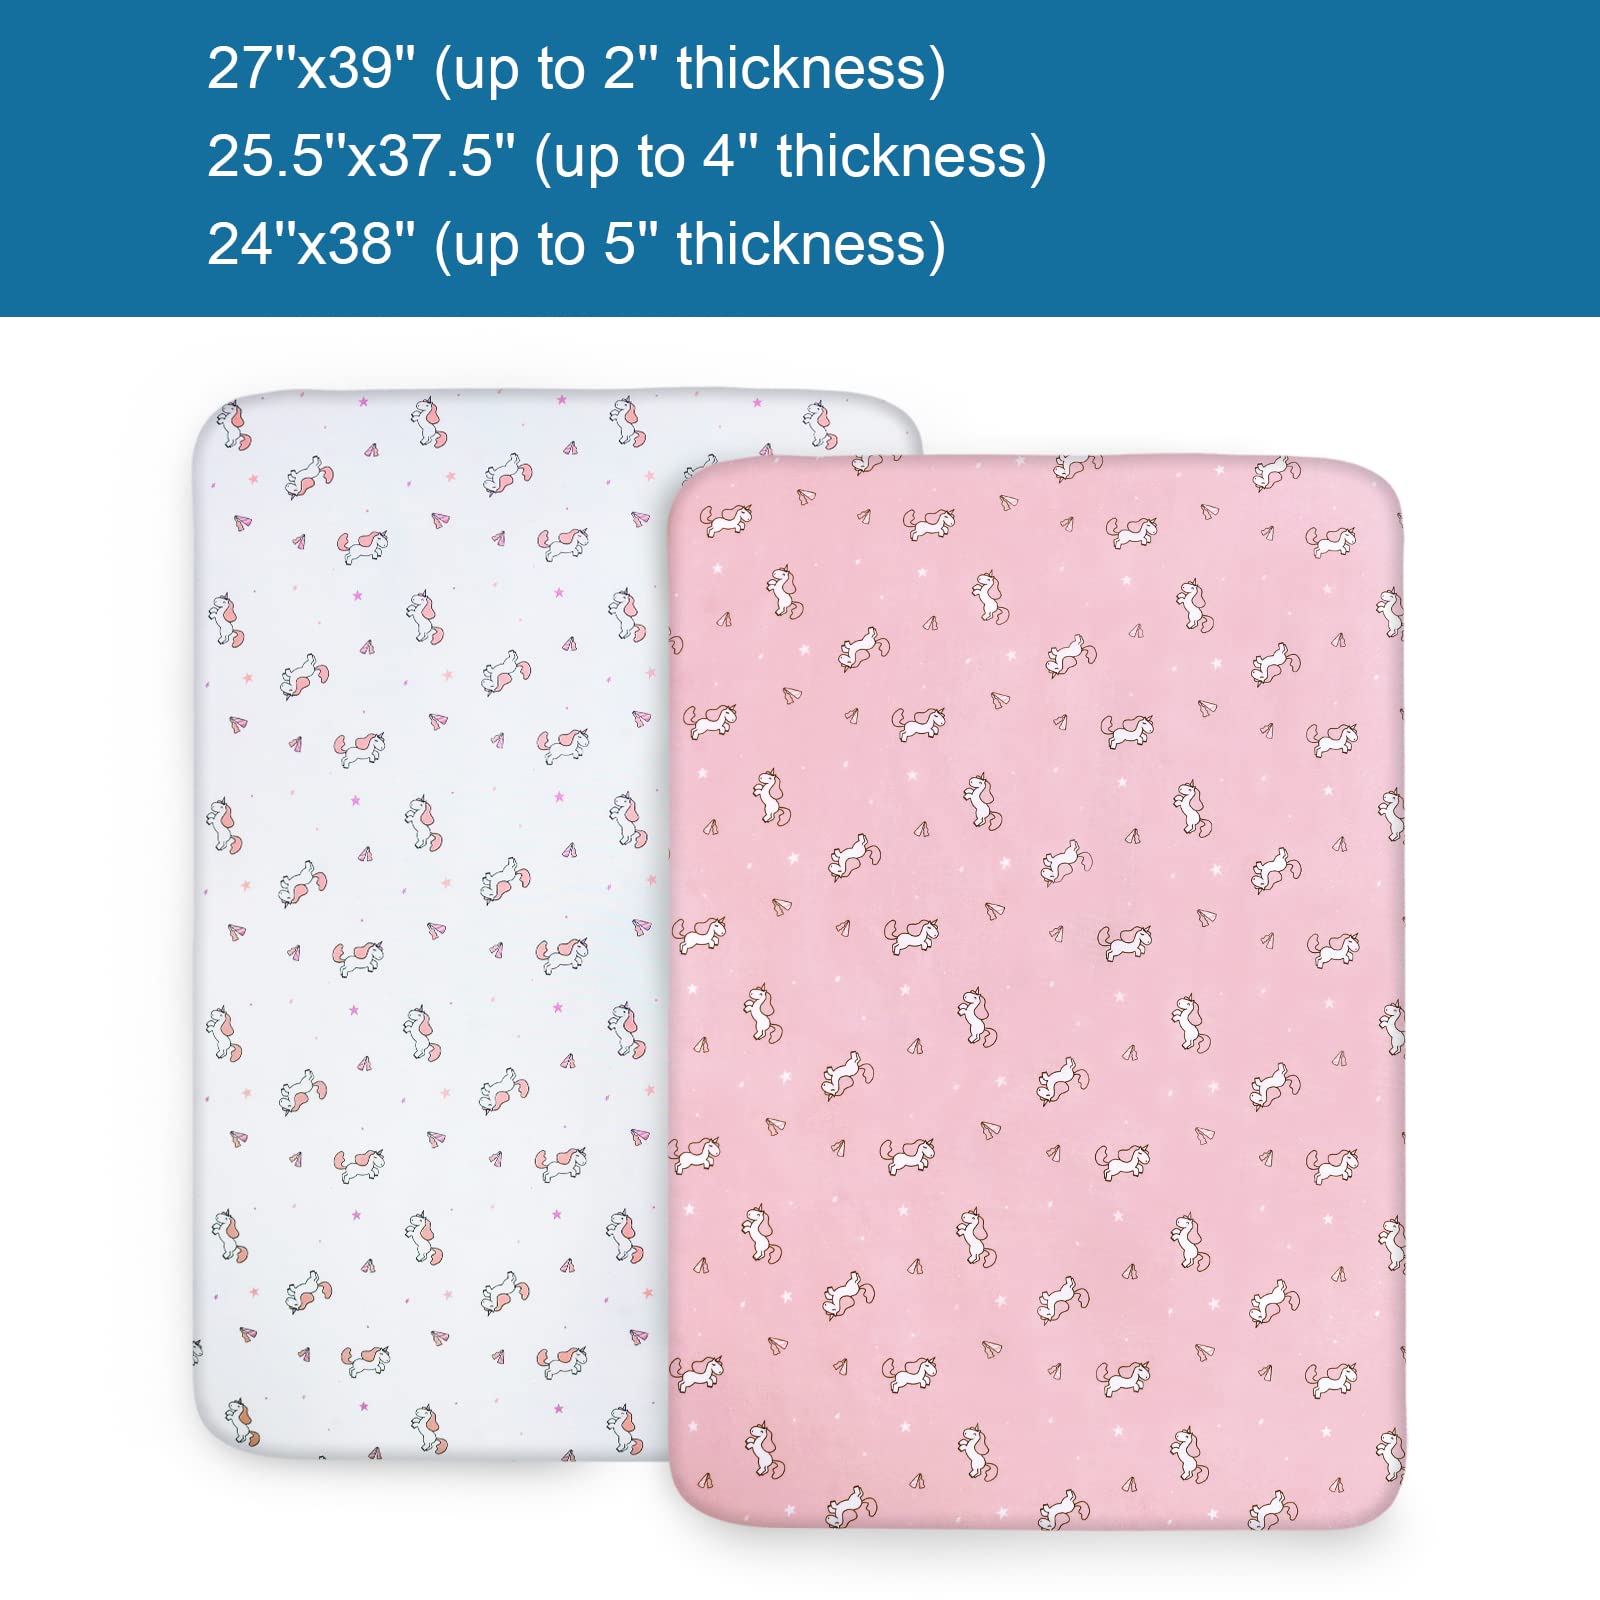 Pack and Play Sheets, Pack n Play Sheets | Mini Crib Sheets 2-Pack, Ultra Soft Pack n Play Mattresses Sheets Compatible with Graco Pack n Play, Soft and Breathable Material, Pink